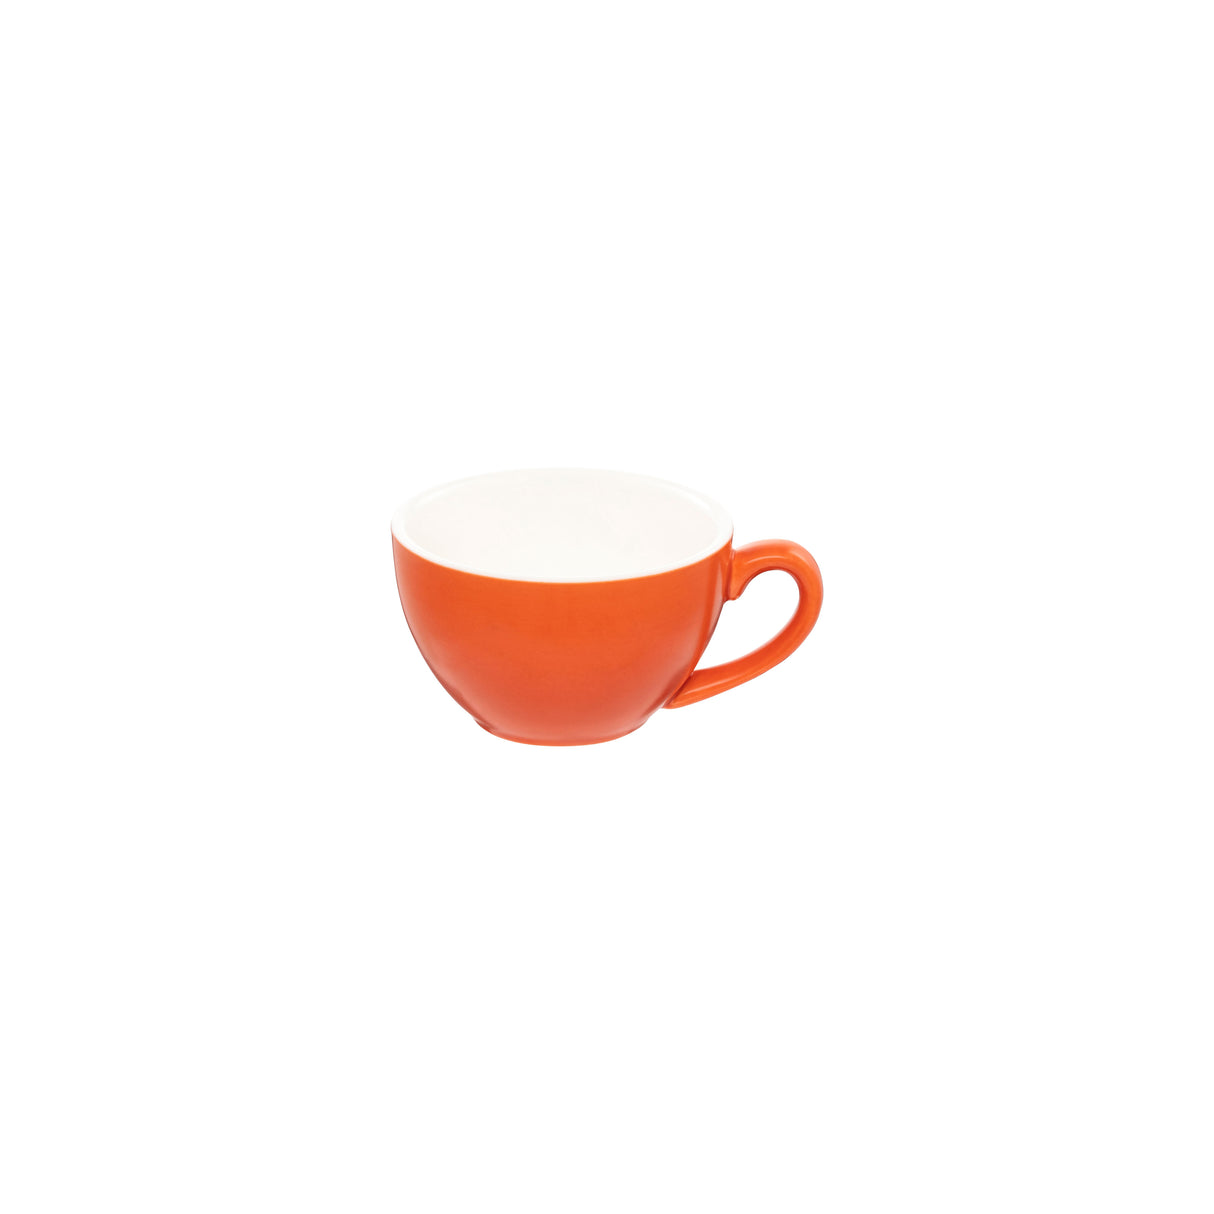 Cappuccino Cup - Jaffa, 200ml, Intorno: Pack of 6